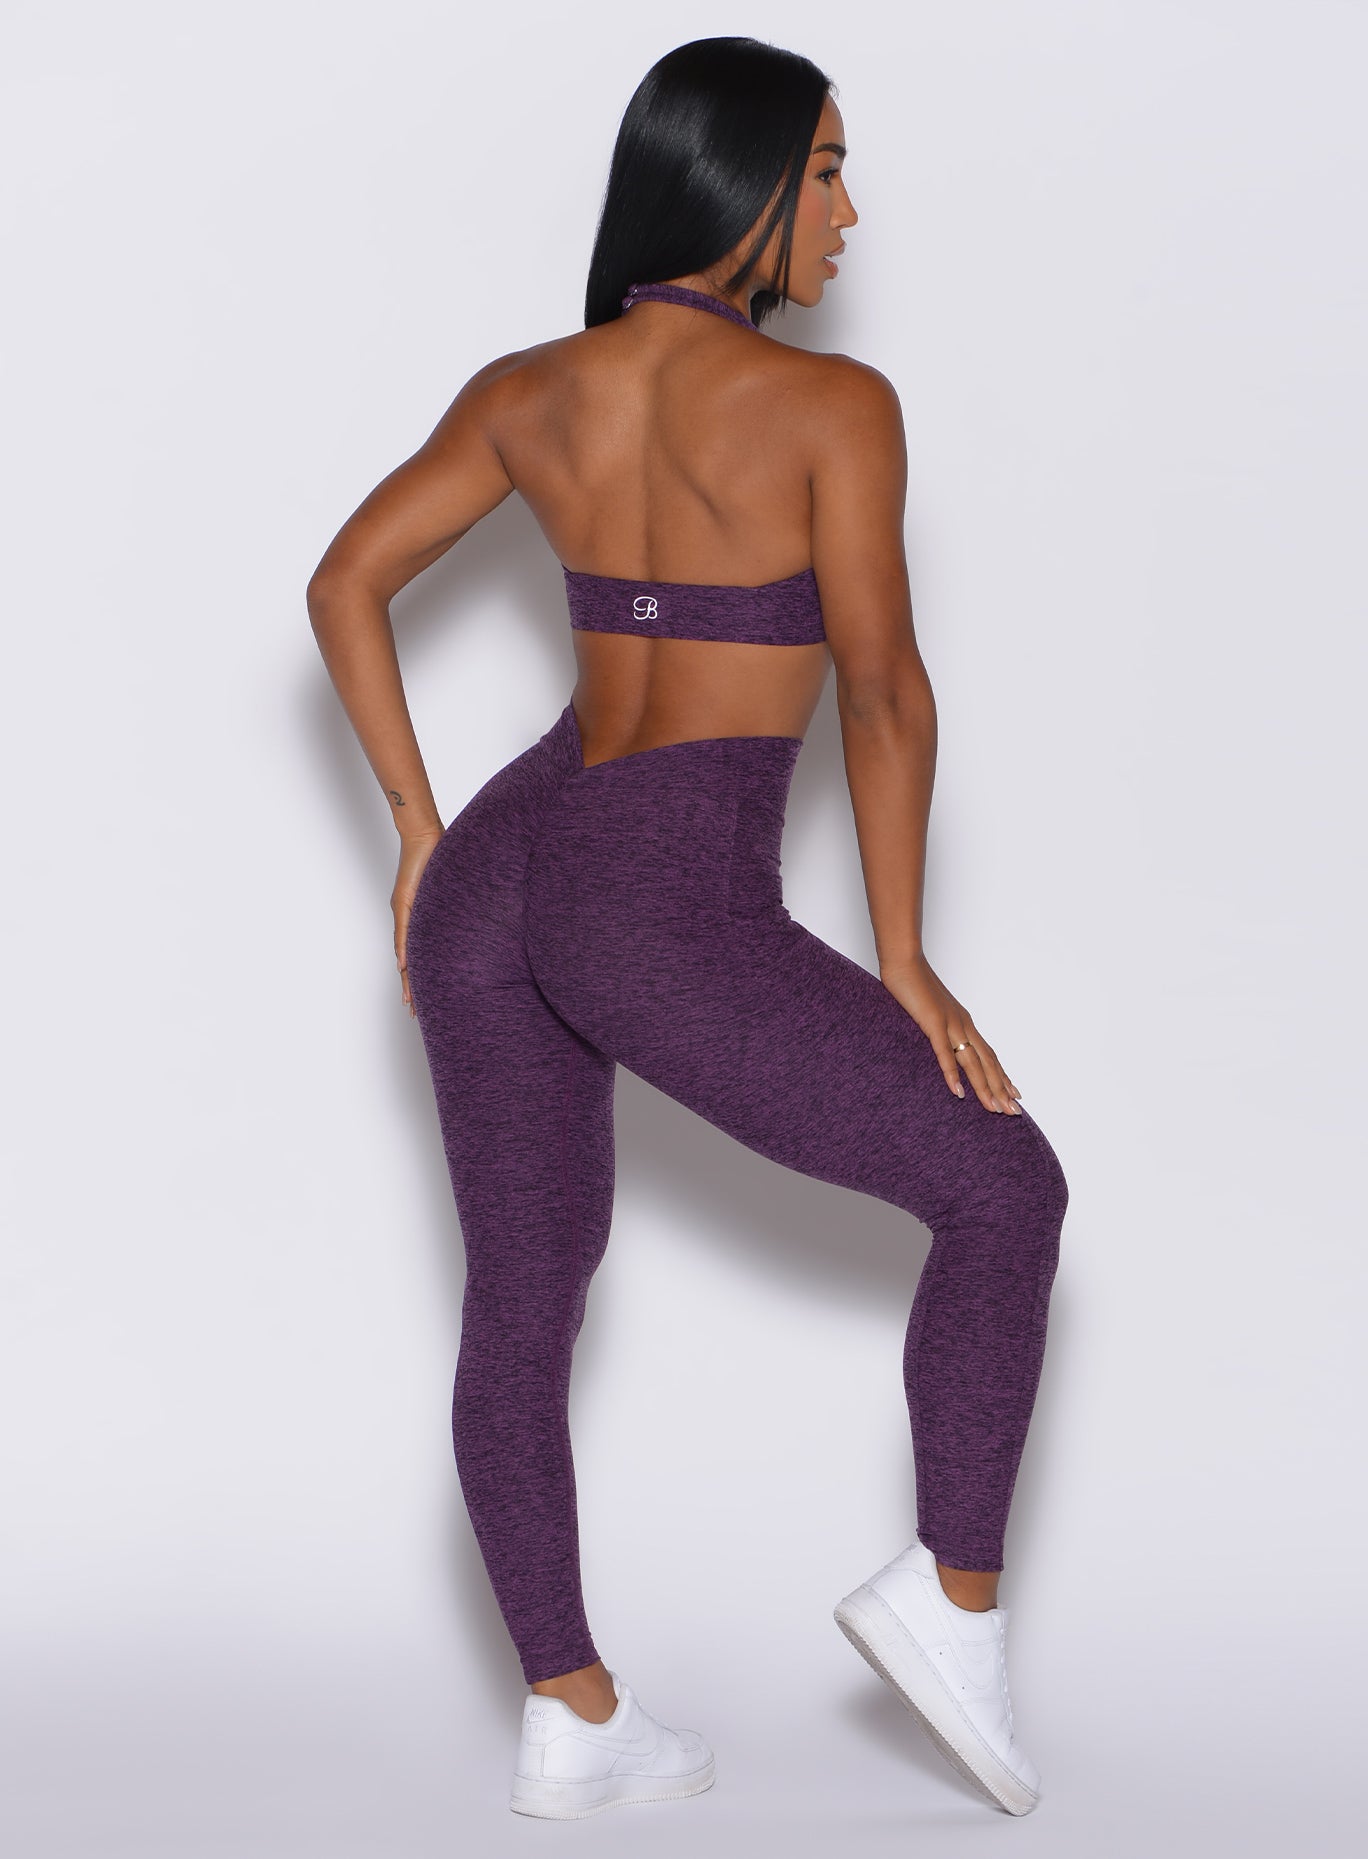 Back profile view of a model facing to her right wearing our V Back Leggings in purple passion color along with the matching bra